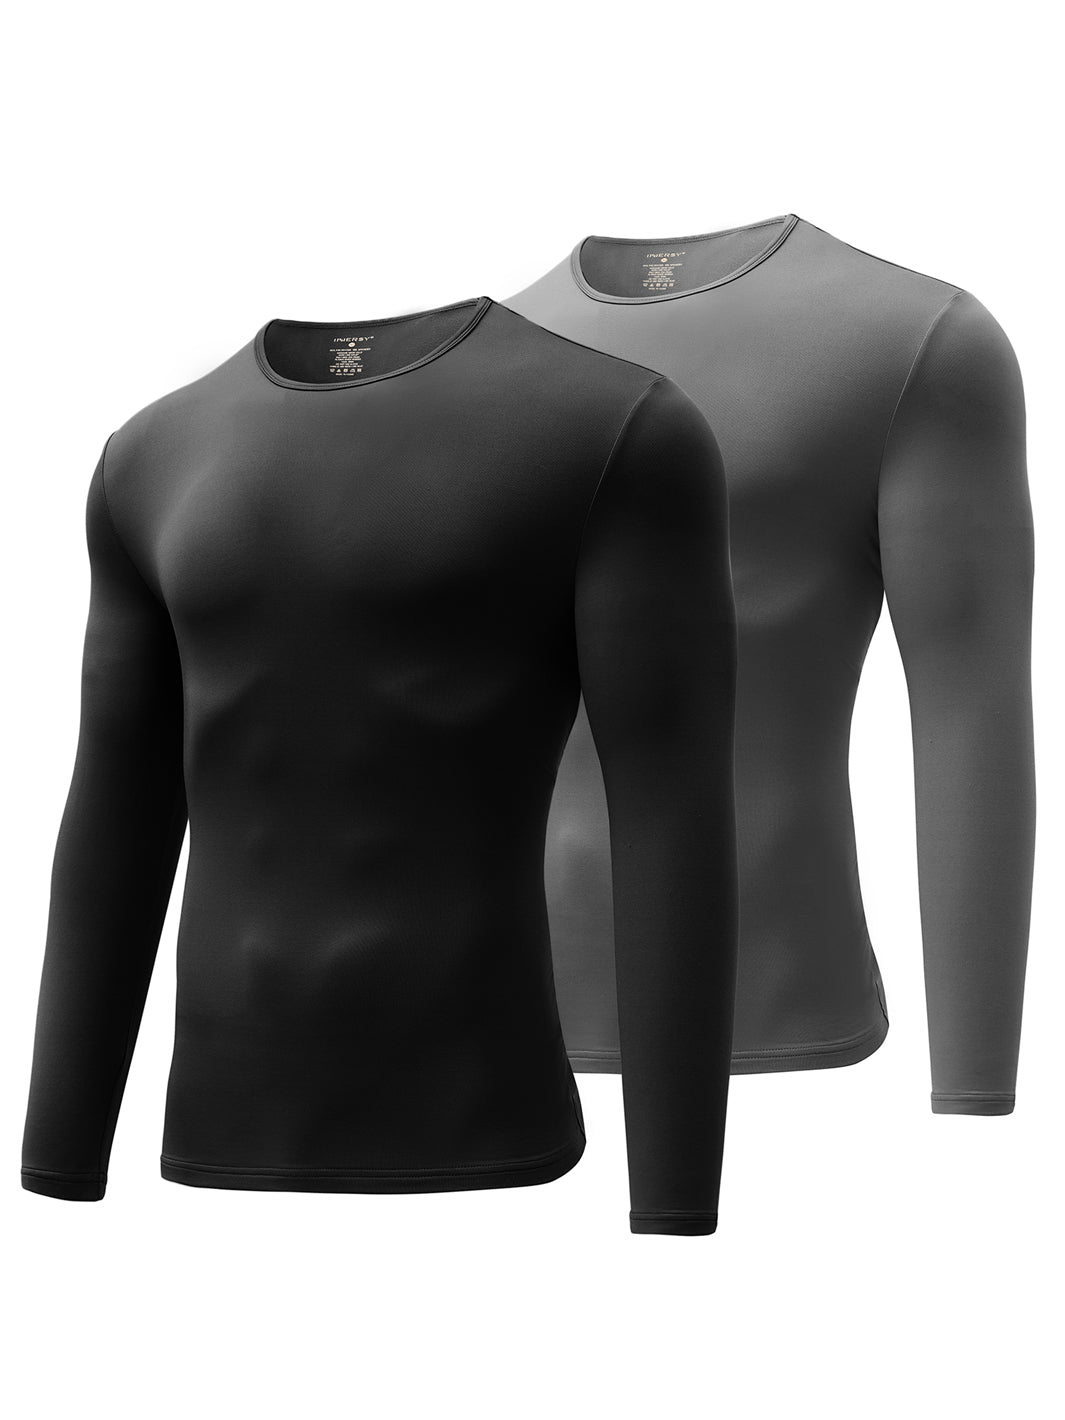 INNERSY Boys Thermal Underwear Lightweight Long Base Layer Sets 1 Pack( Medium, Grey) - Coupon Codes, Promo Codes, Daily Deals, Save Money Today